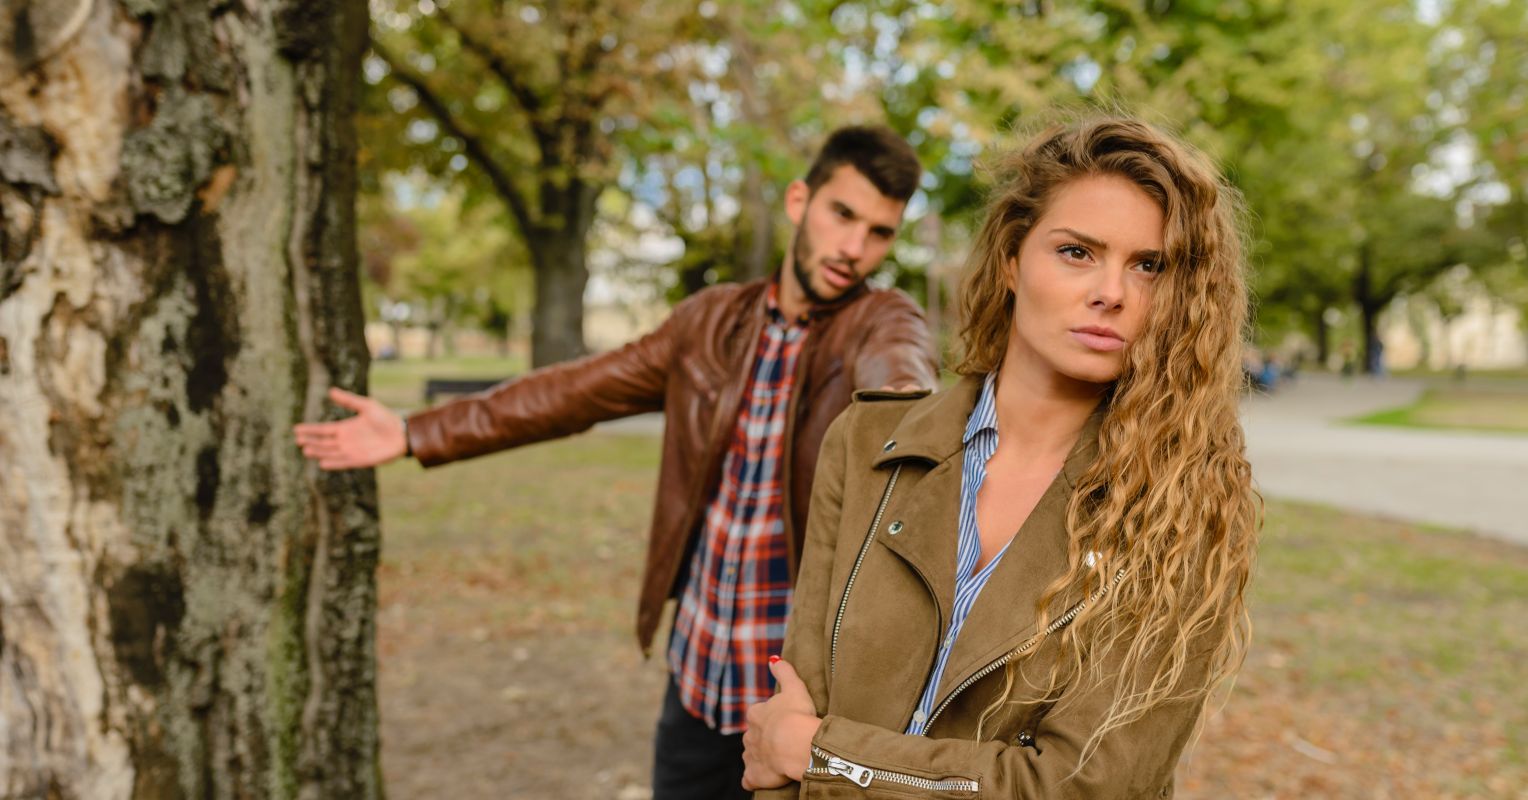 Mens Fears of Womens Anger Psychology Today